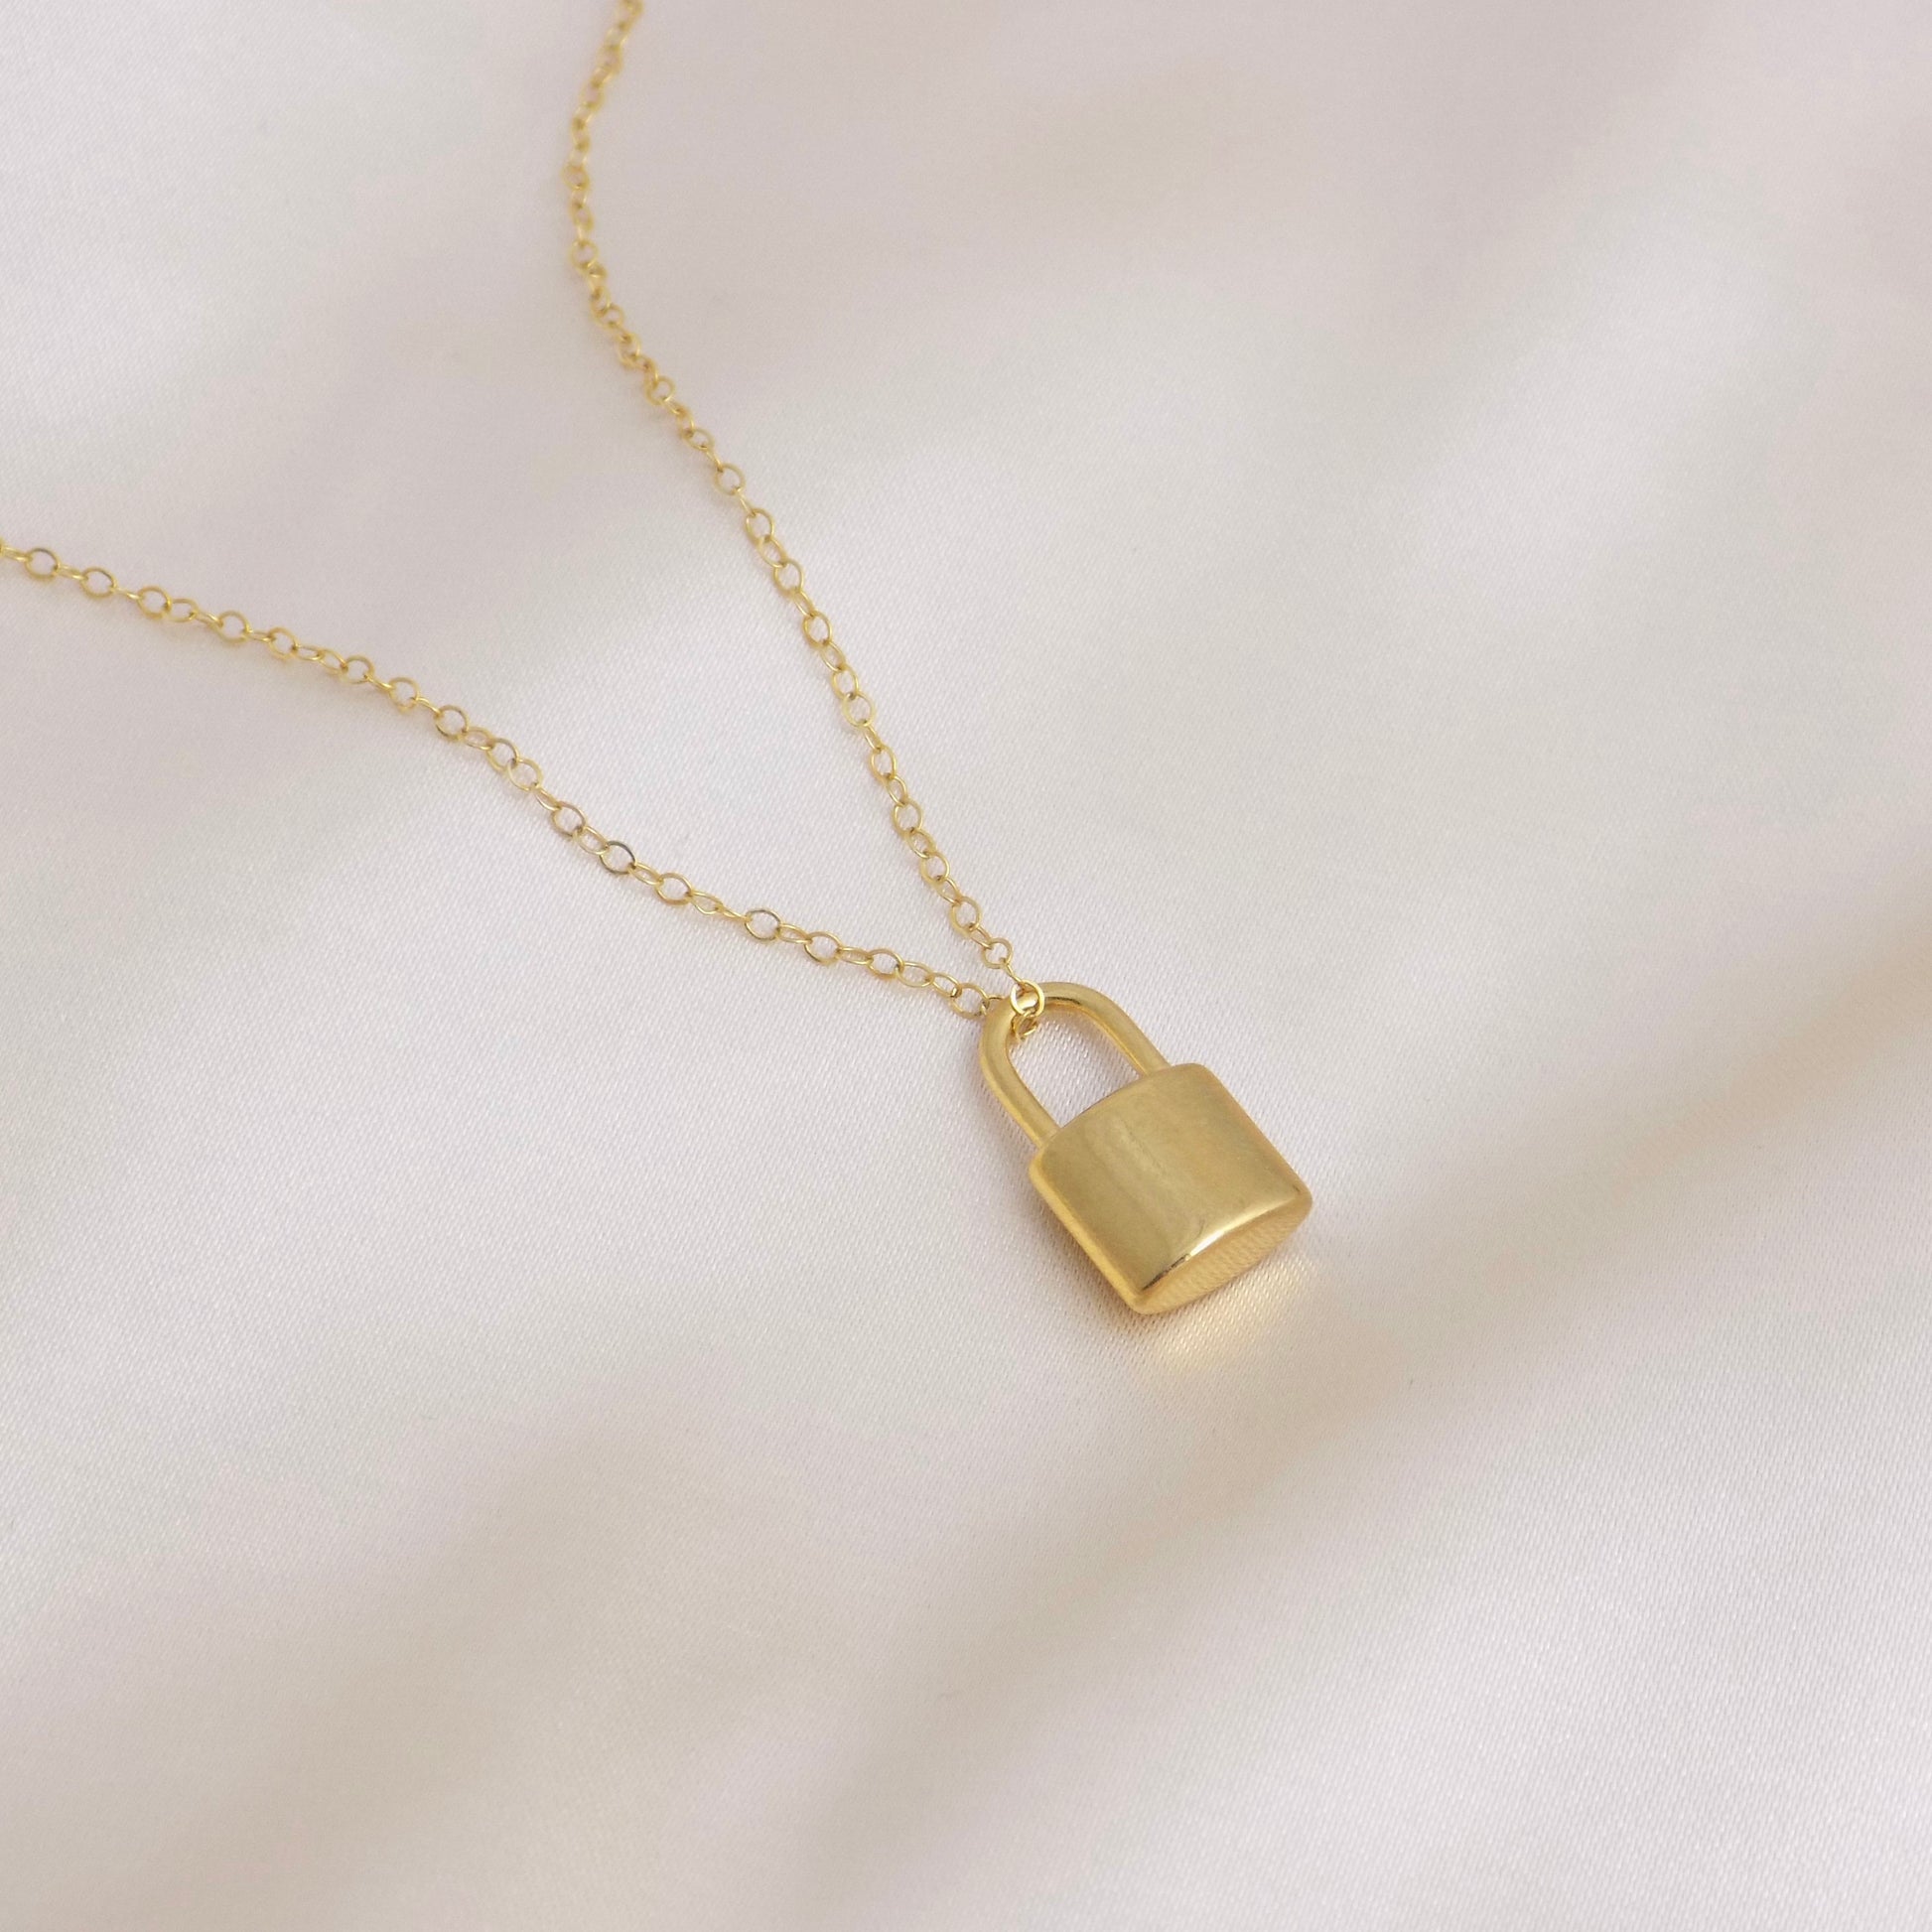 18K Gold Plated Paperclip Chain and Lock Necklace, Padlock Necklace, Gold Lock Necklace, Minimalist Necklace